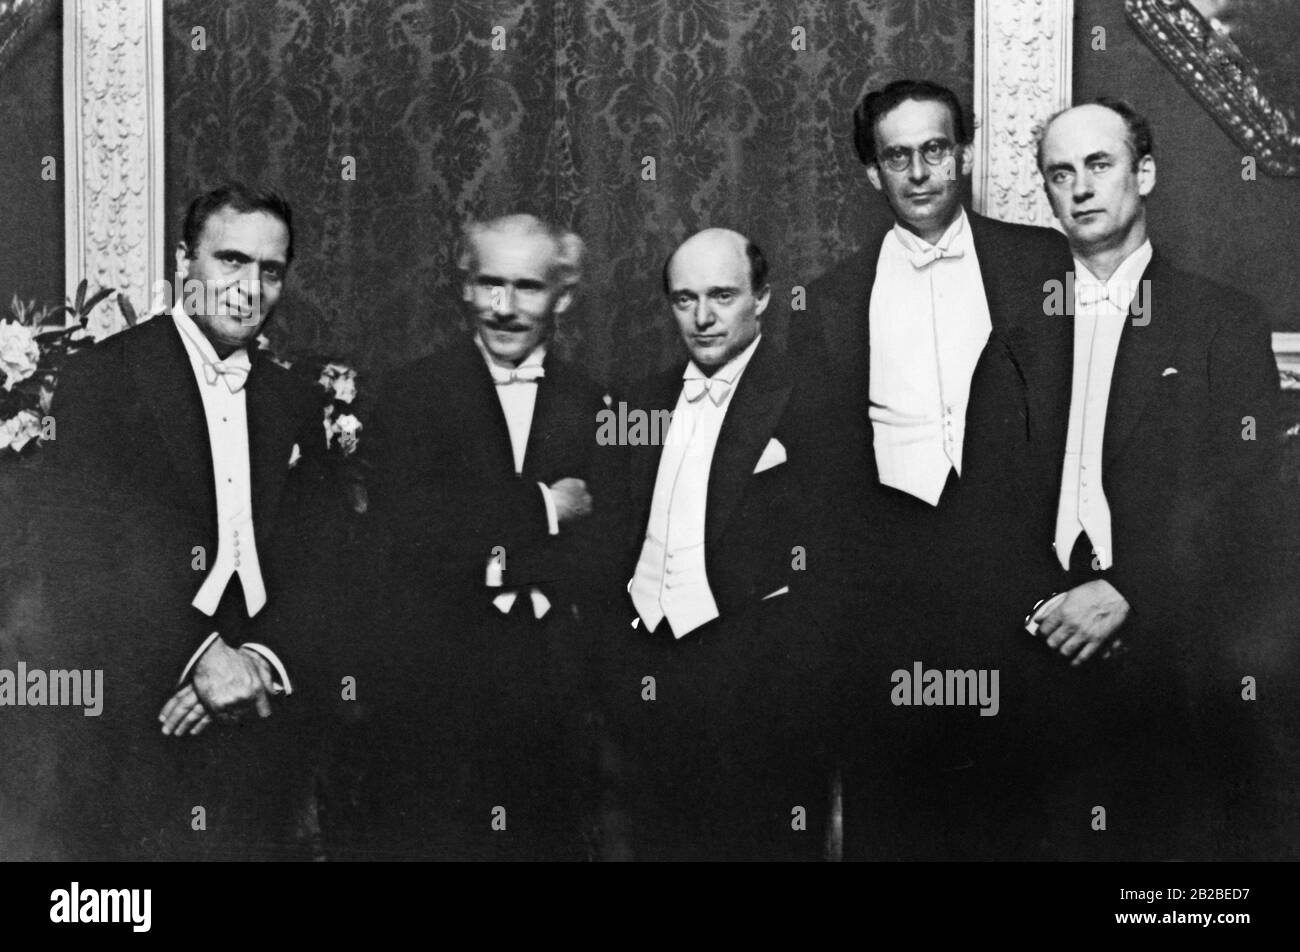 Conductor Wilhelm Furtwängler at a formal dinner at the Italian Embassy in Berlin on the occasion of the visit Toscanini paid to Berlin Art Week. the picture was taken on May 28, 1930, after Toscanini's second Art Week concert. Wilhelm Furtwaengler, Germany Stock Photo